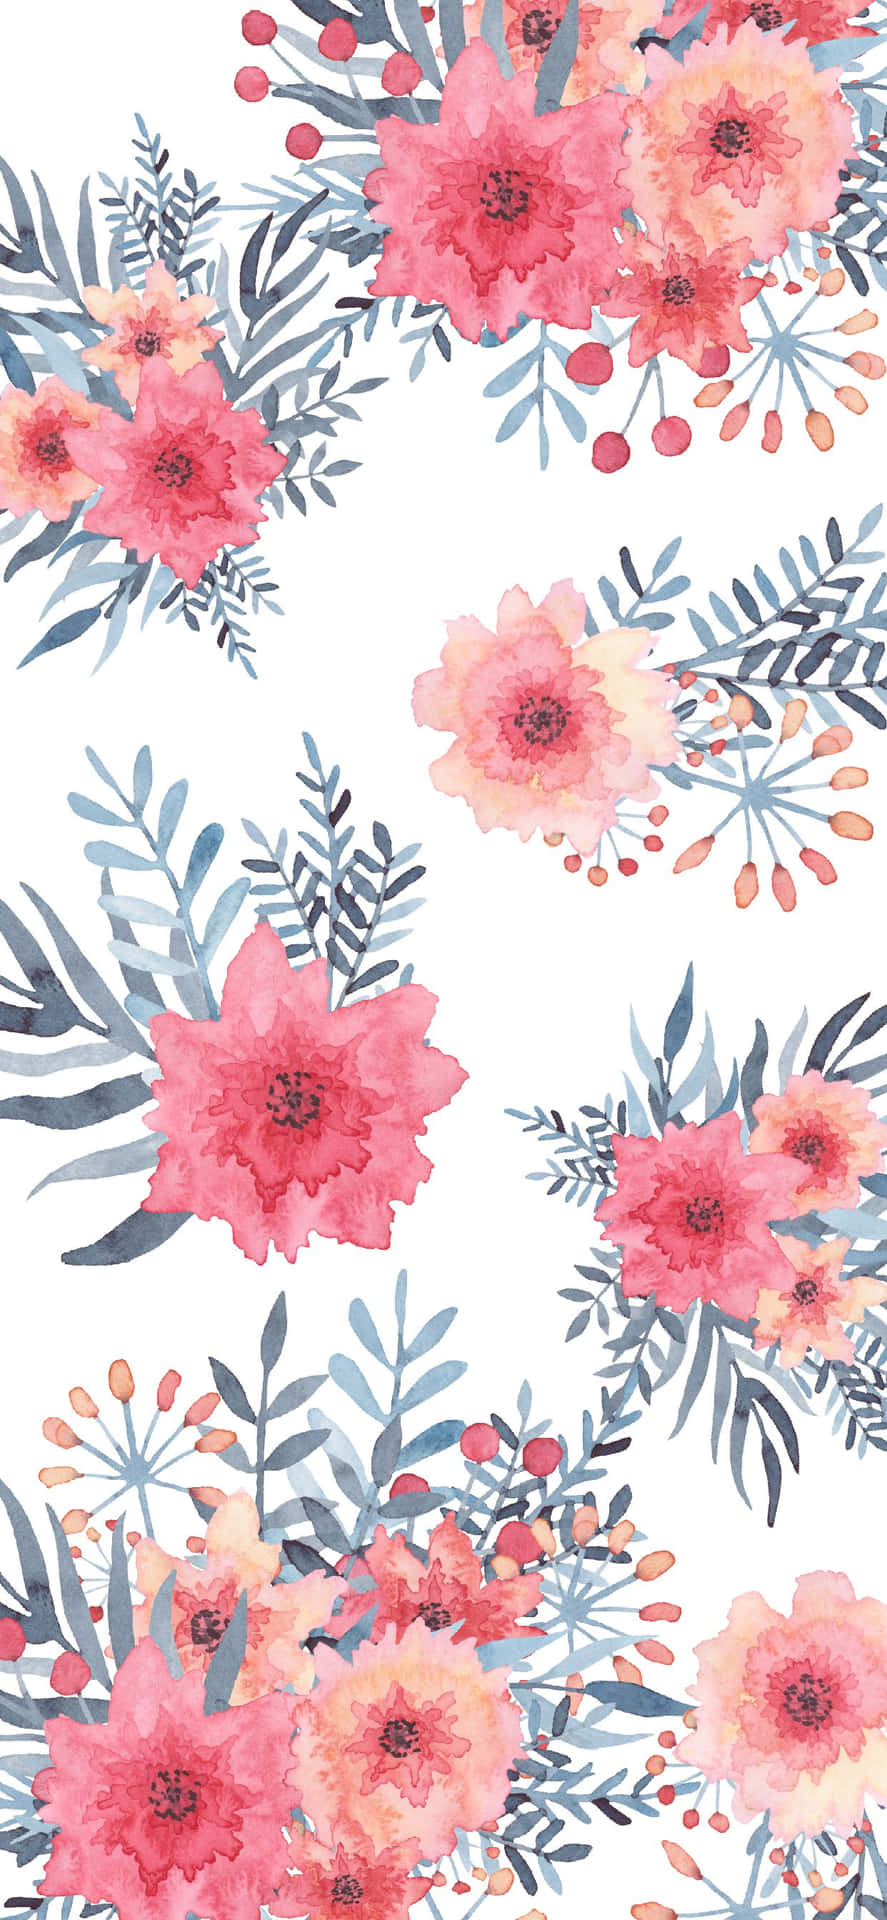 Get Ready For Spring With A Cute New Iphone Wallpaper